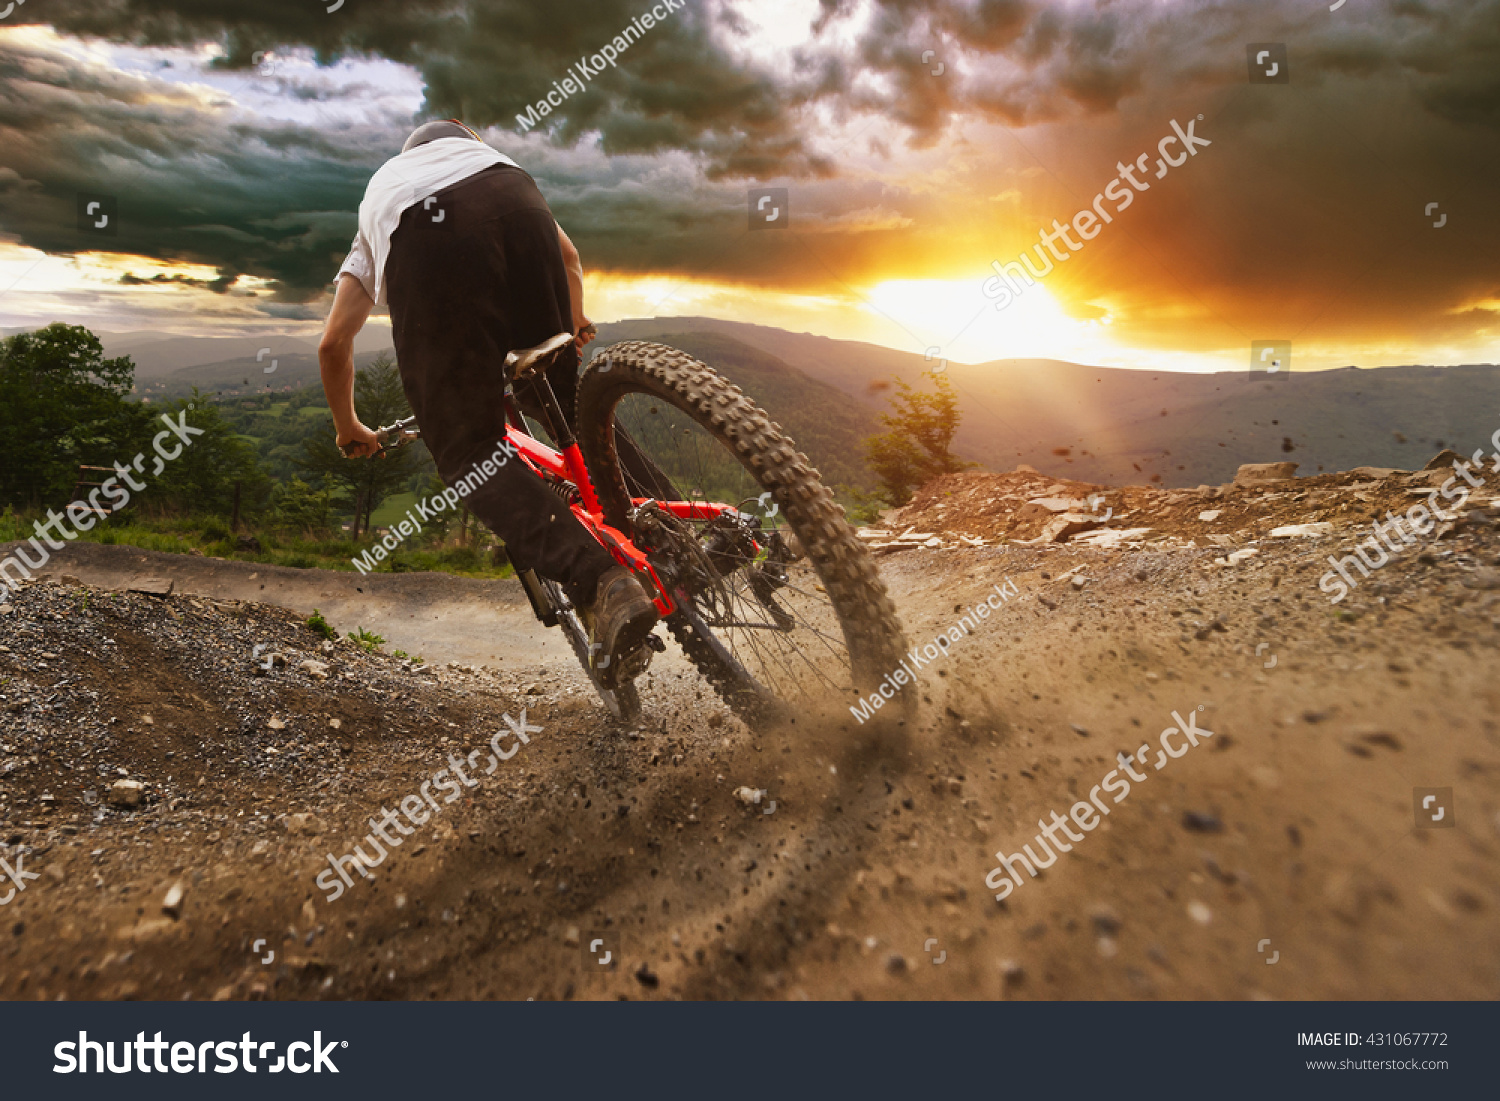 Man on mountain bike rides on the trail on a stormy sunset. #431067772